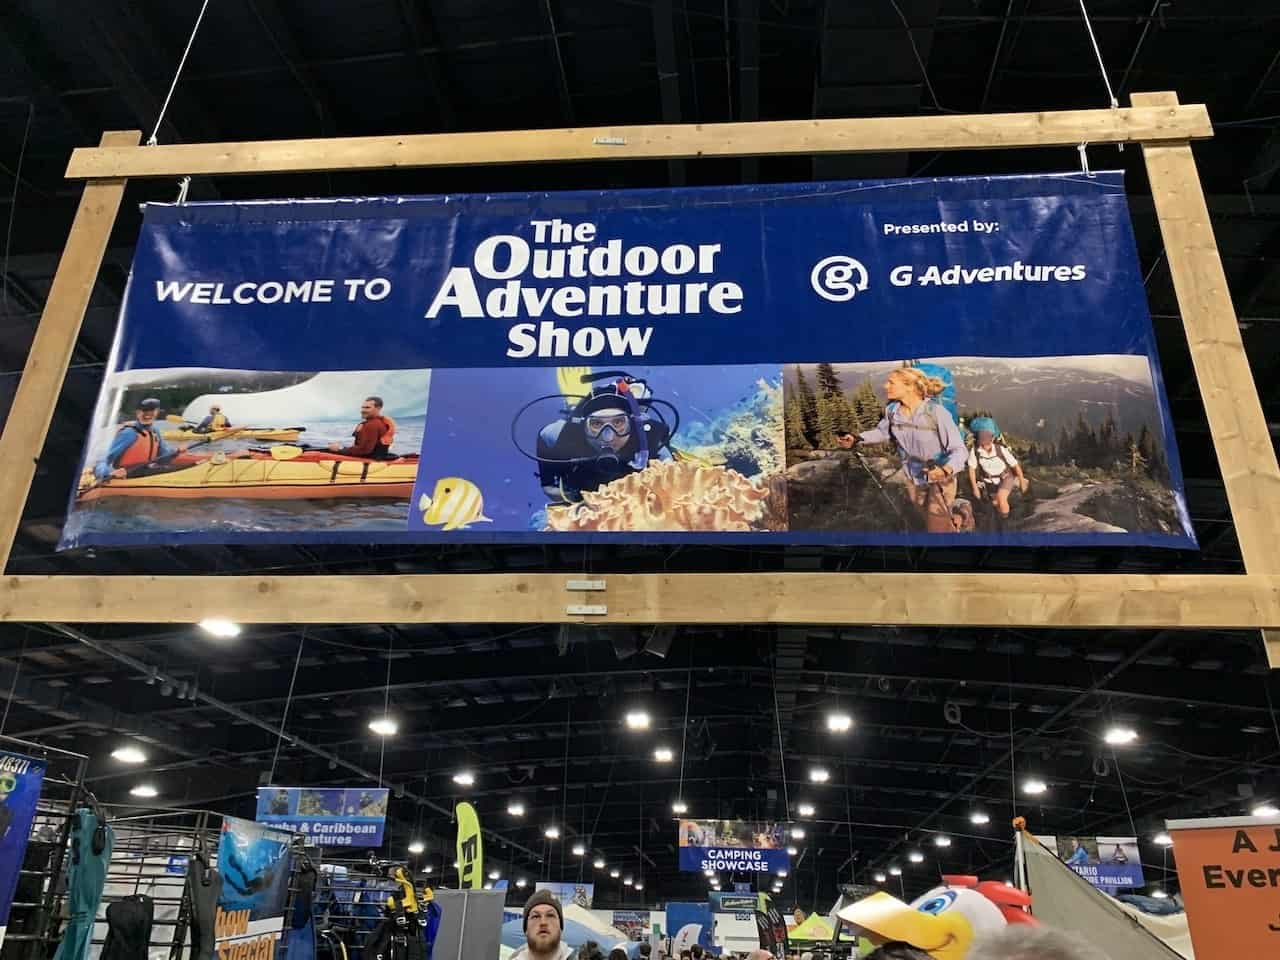 Outdoor Adventure Show Entrance Toronto Ontario Canada - There were so many amazing things to see and do at the Outdoor Adventure Show in Toronto, Ontario, Canada. Visitors could easily spend hours browsing the aisles and visiting the different displays at the show.